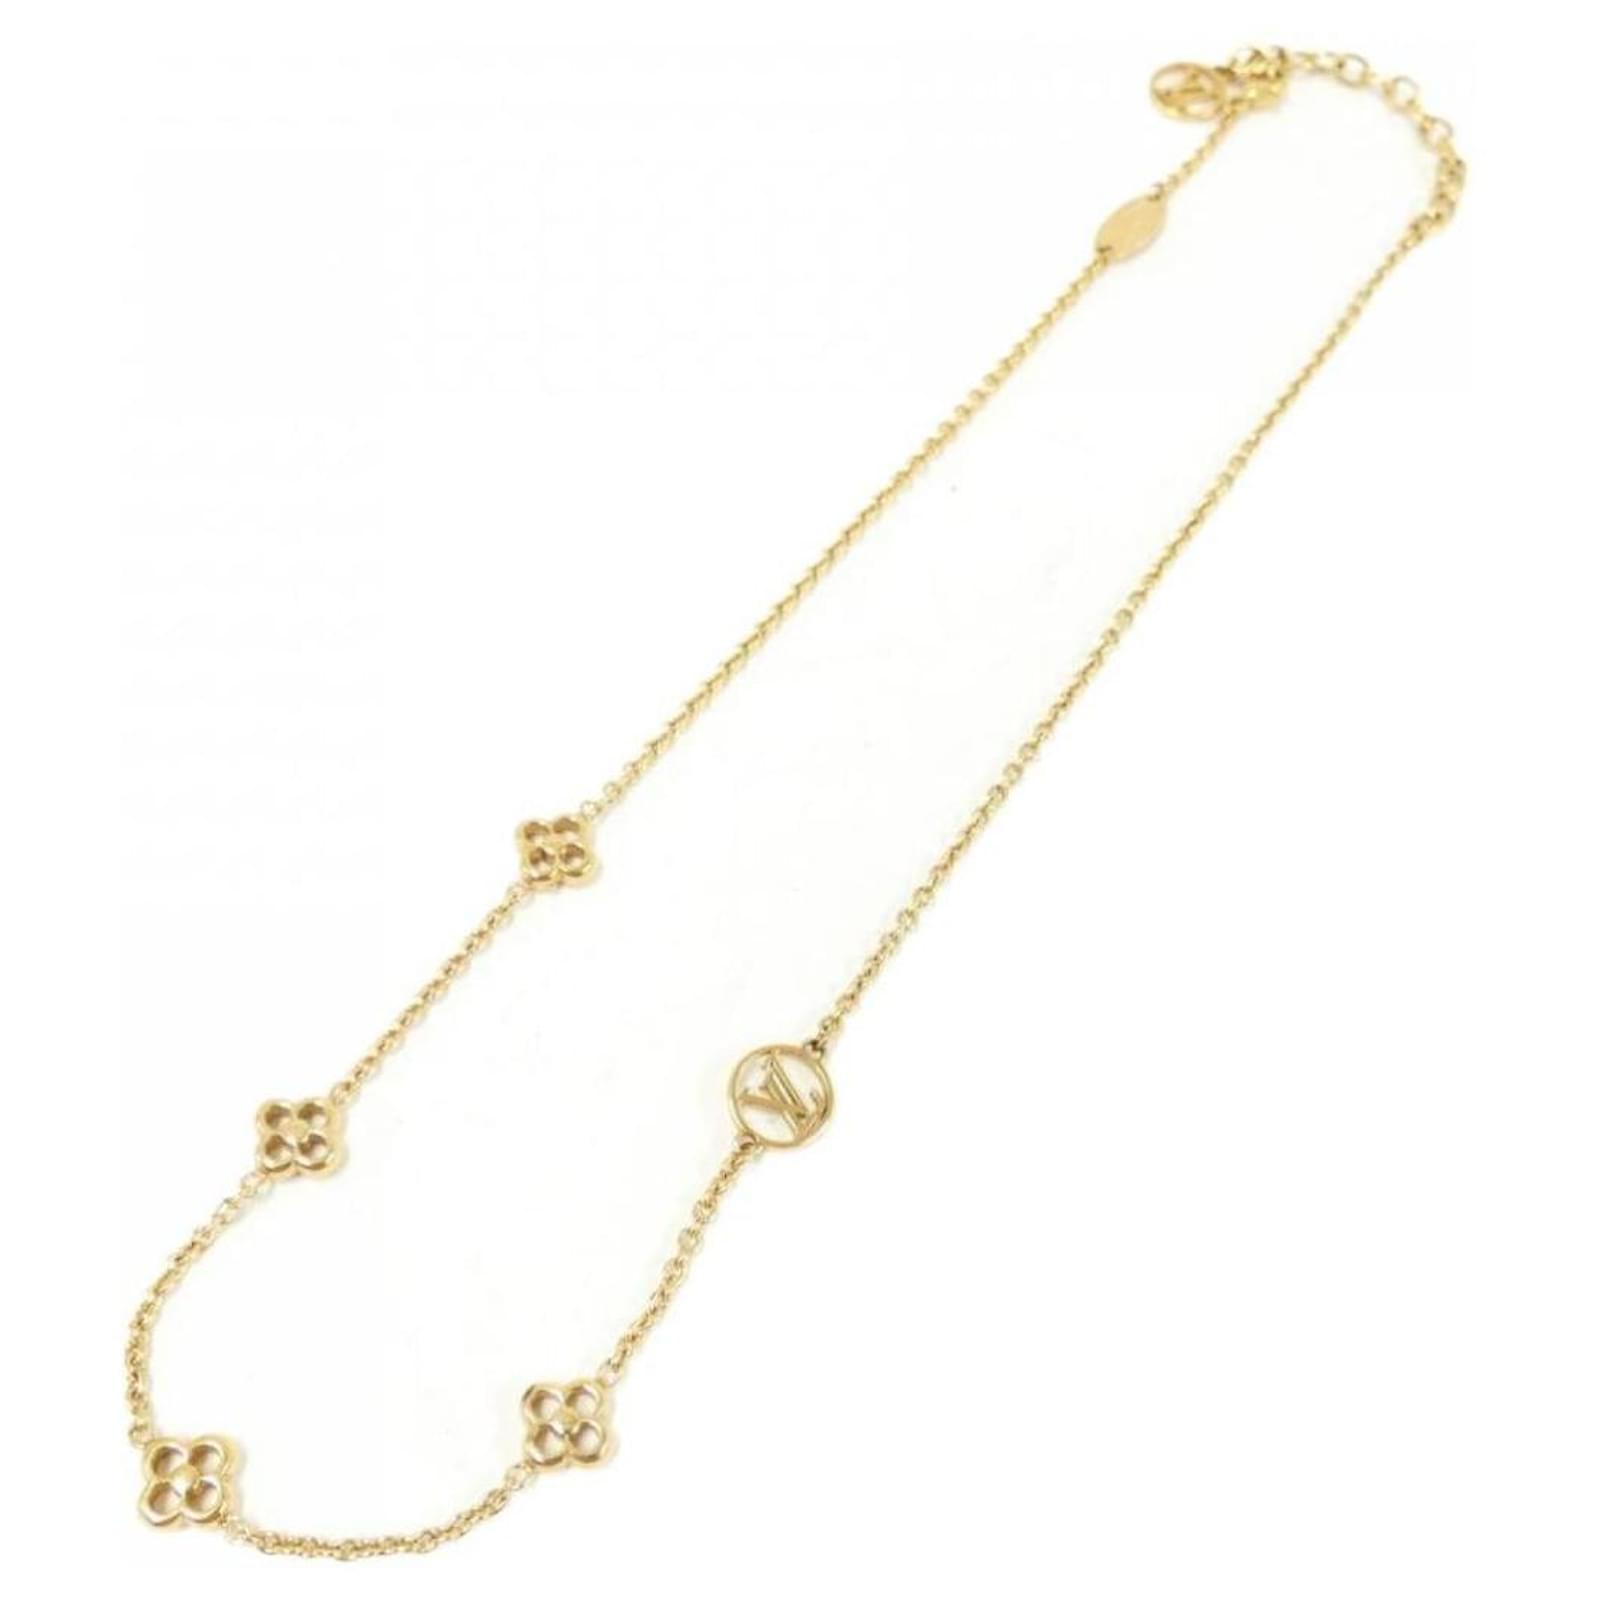 LOUIS VUITTON Flower Full Necklace Gold M68125 Accessory 90178195